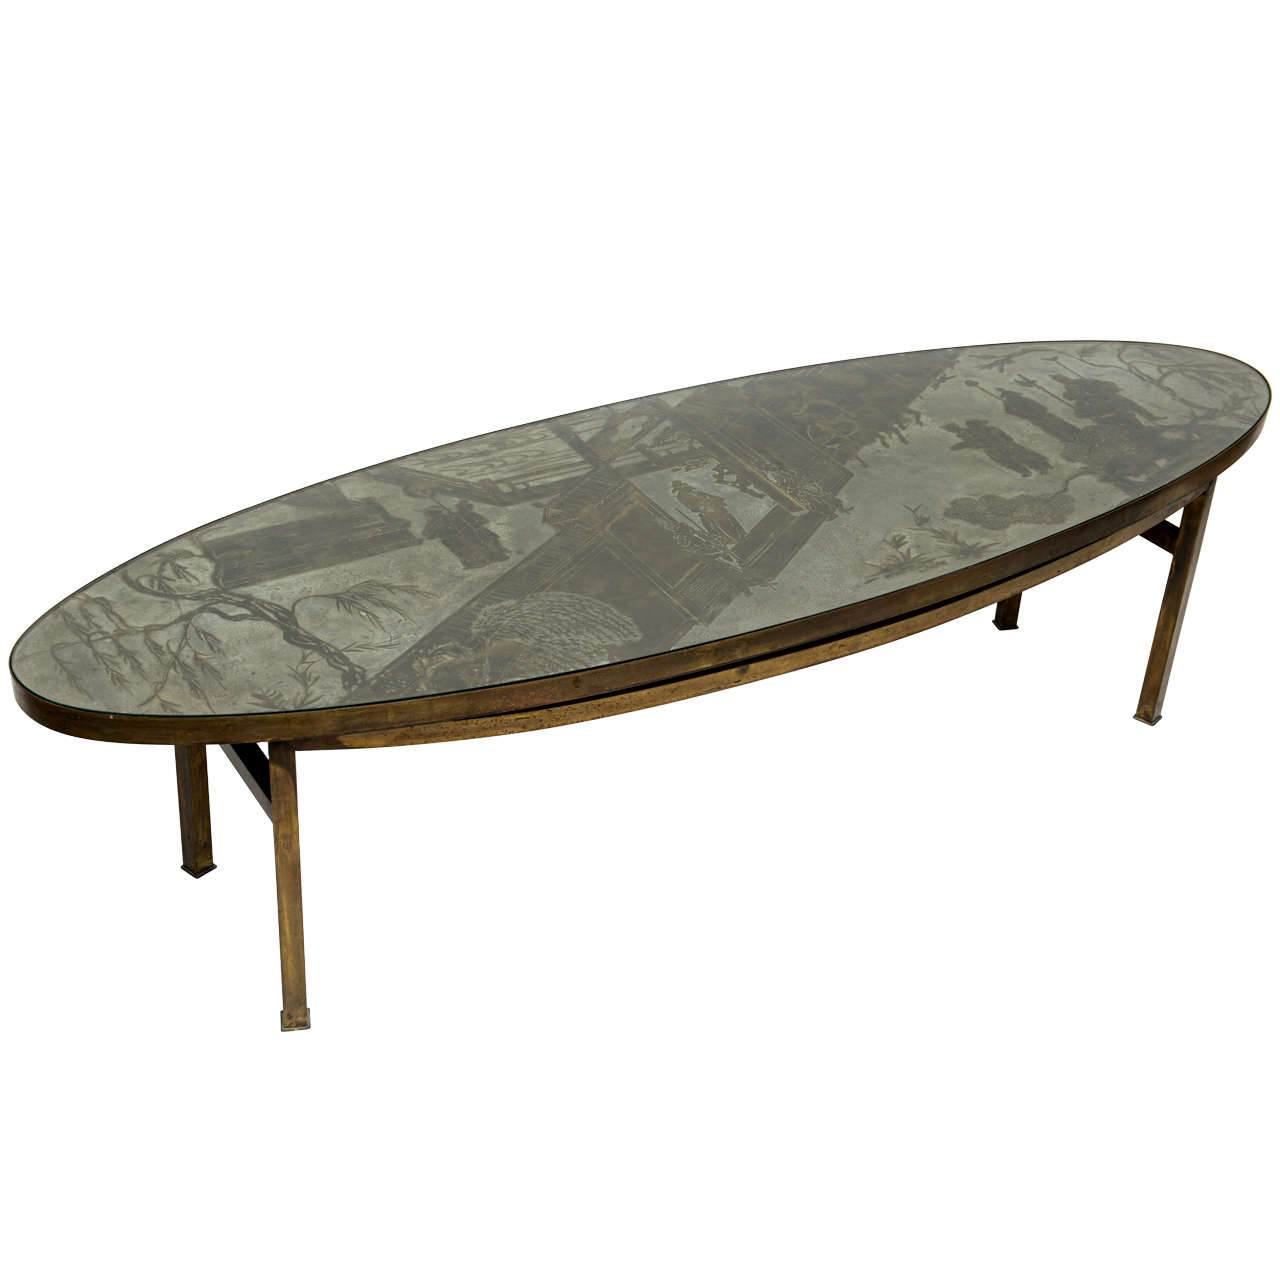 Unusual Oval "Chan" Coffee Table by Philip and Kelvin LaVerne